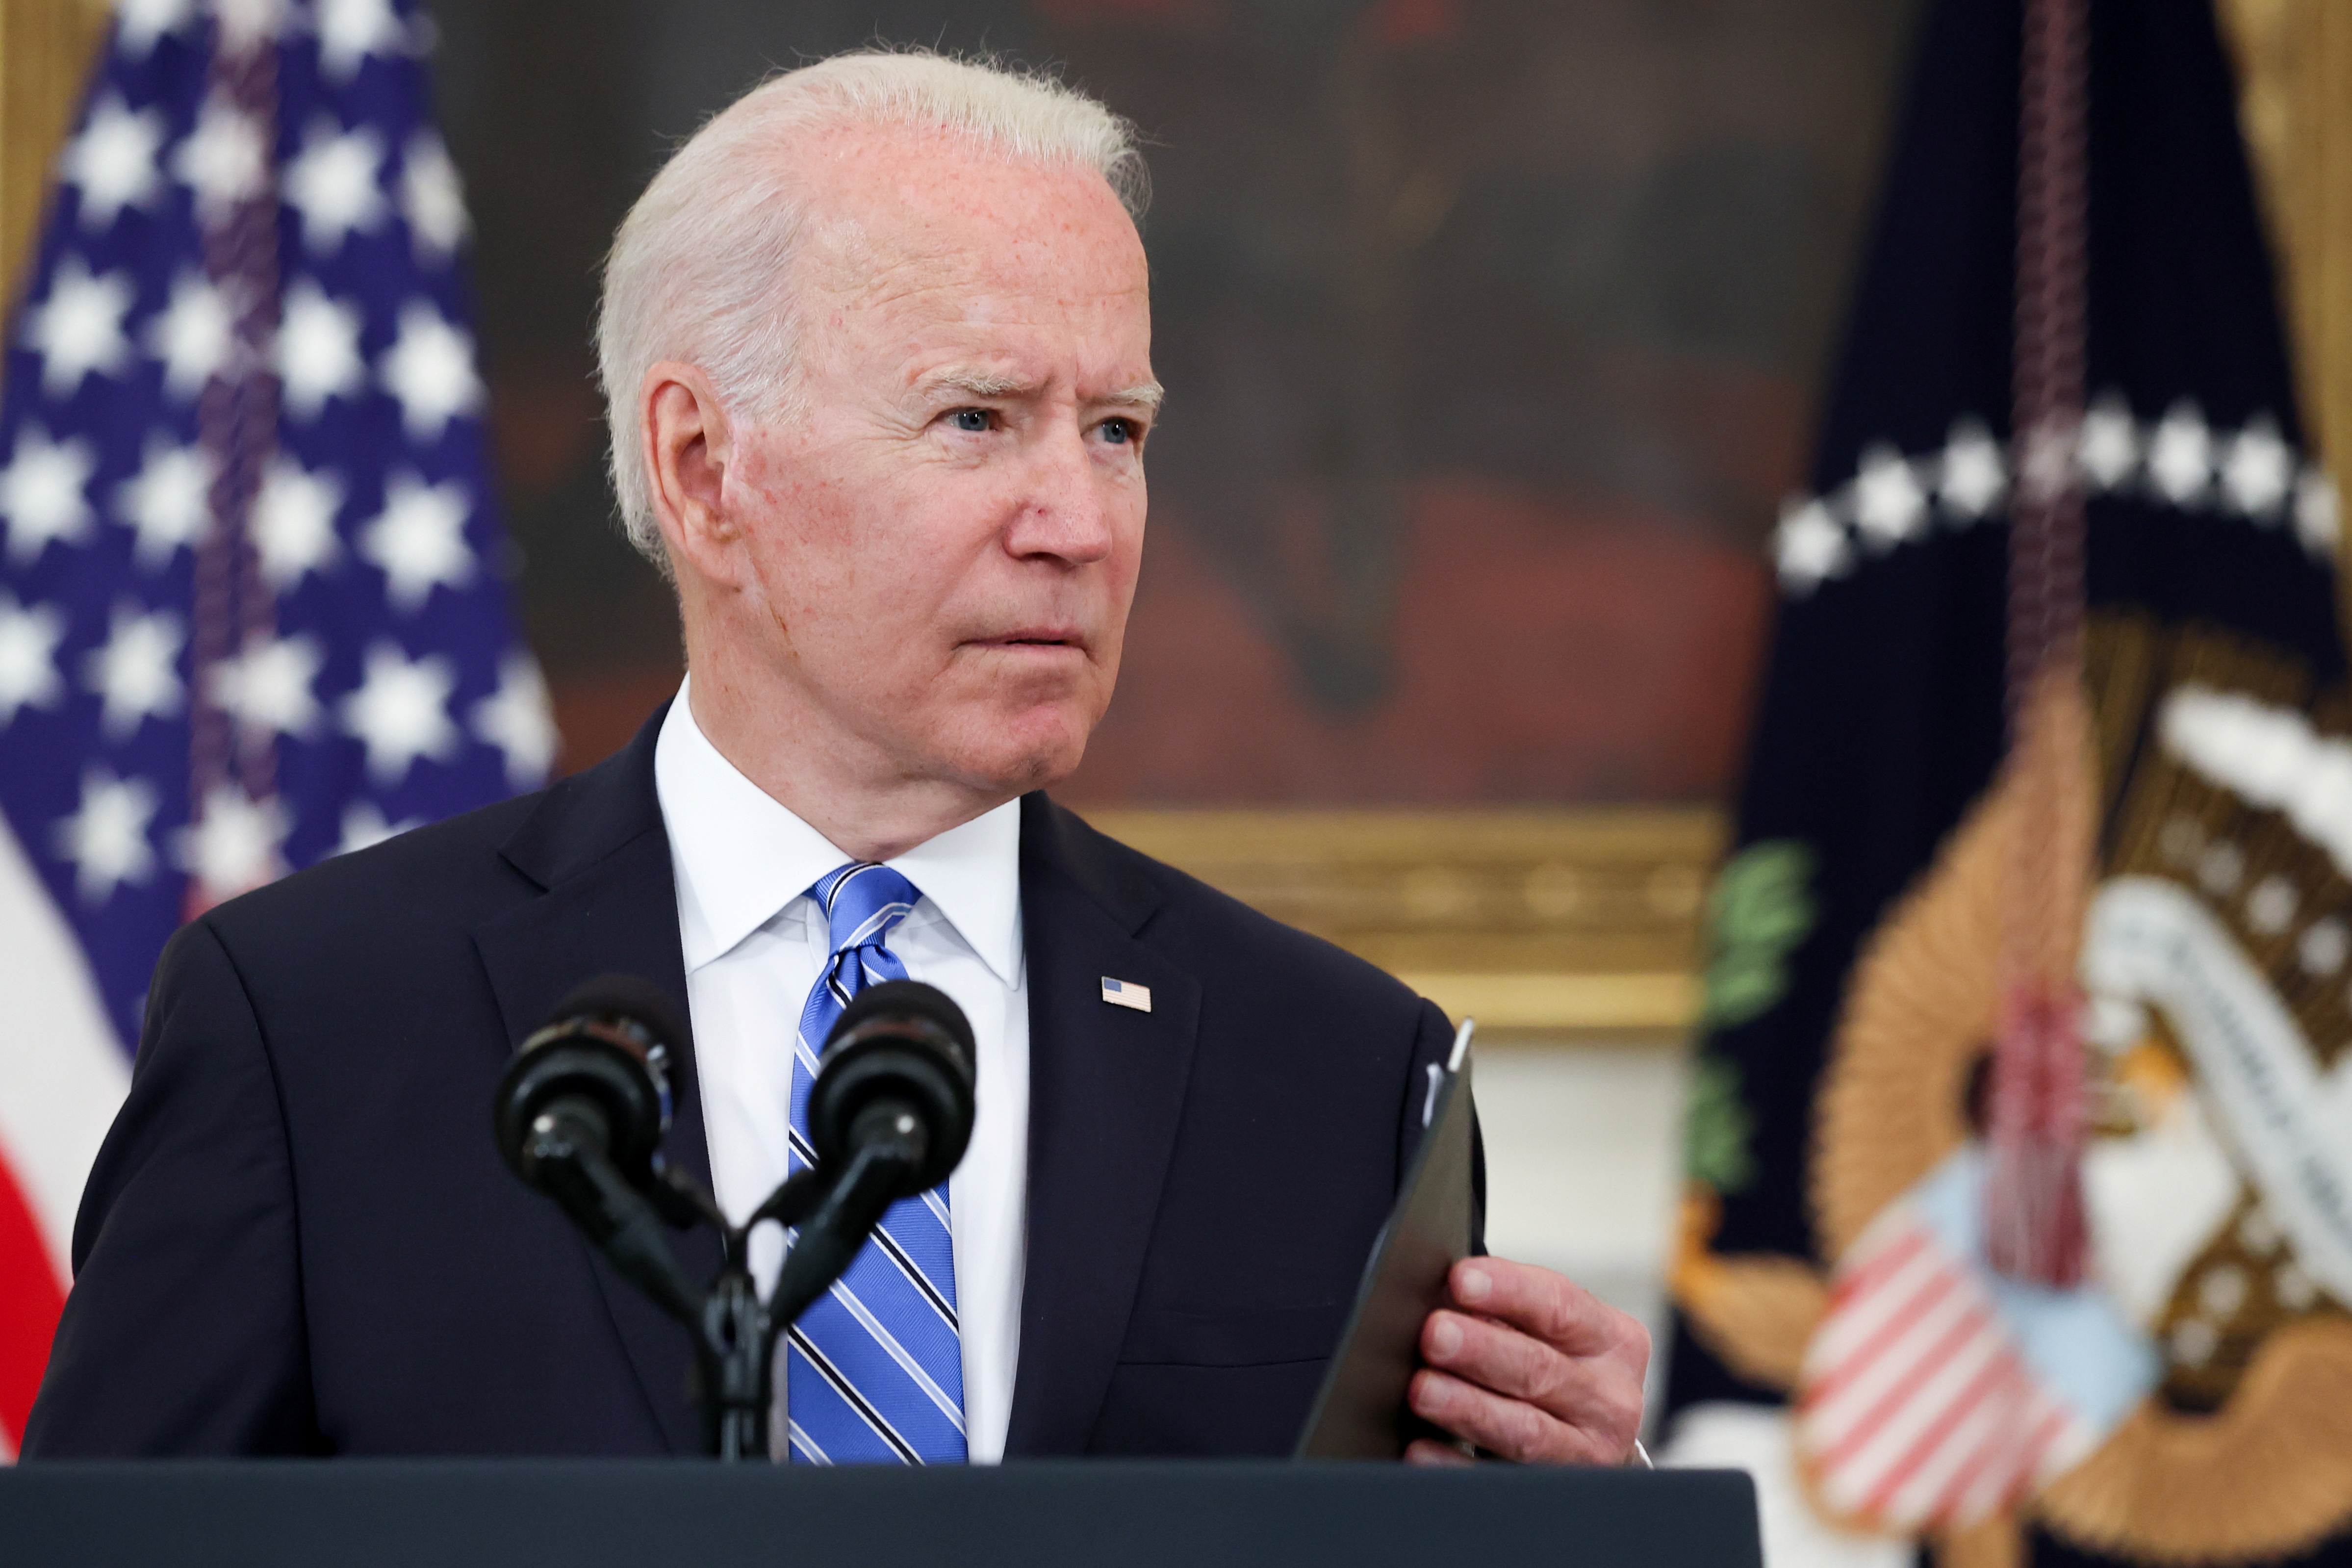 Biden S Town Hall At Catholic University Riles Bishop Abortion Opponents Reuters